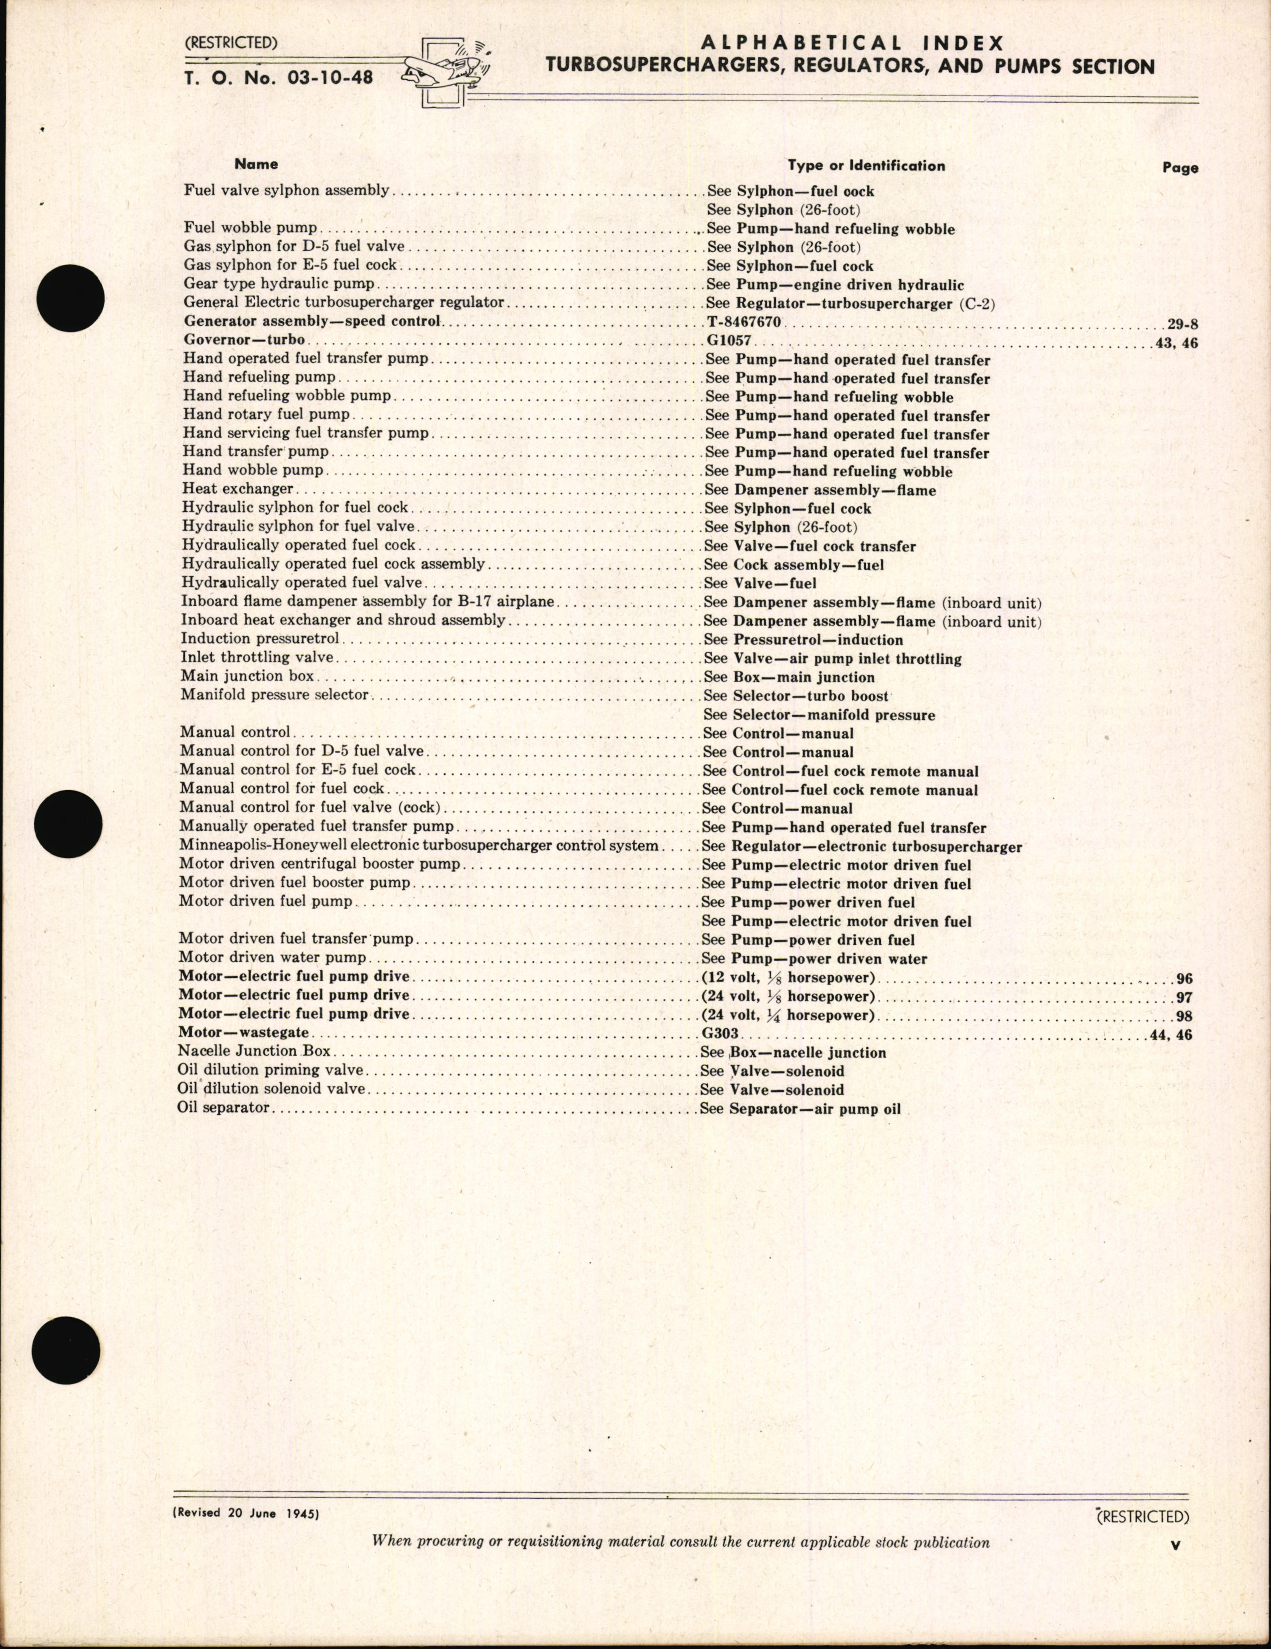 Sample page 7 from AirCorps Library document: Index of Army-Navy Aeronautical Equipment - Turbosuperchargers and Regulators, Pumps, and Pump Accessories